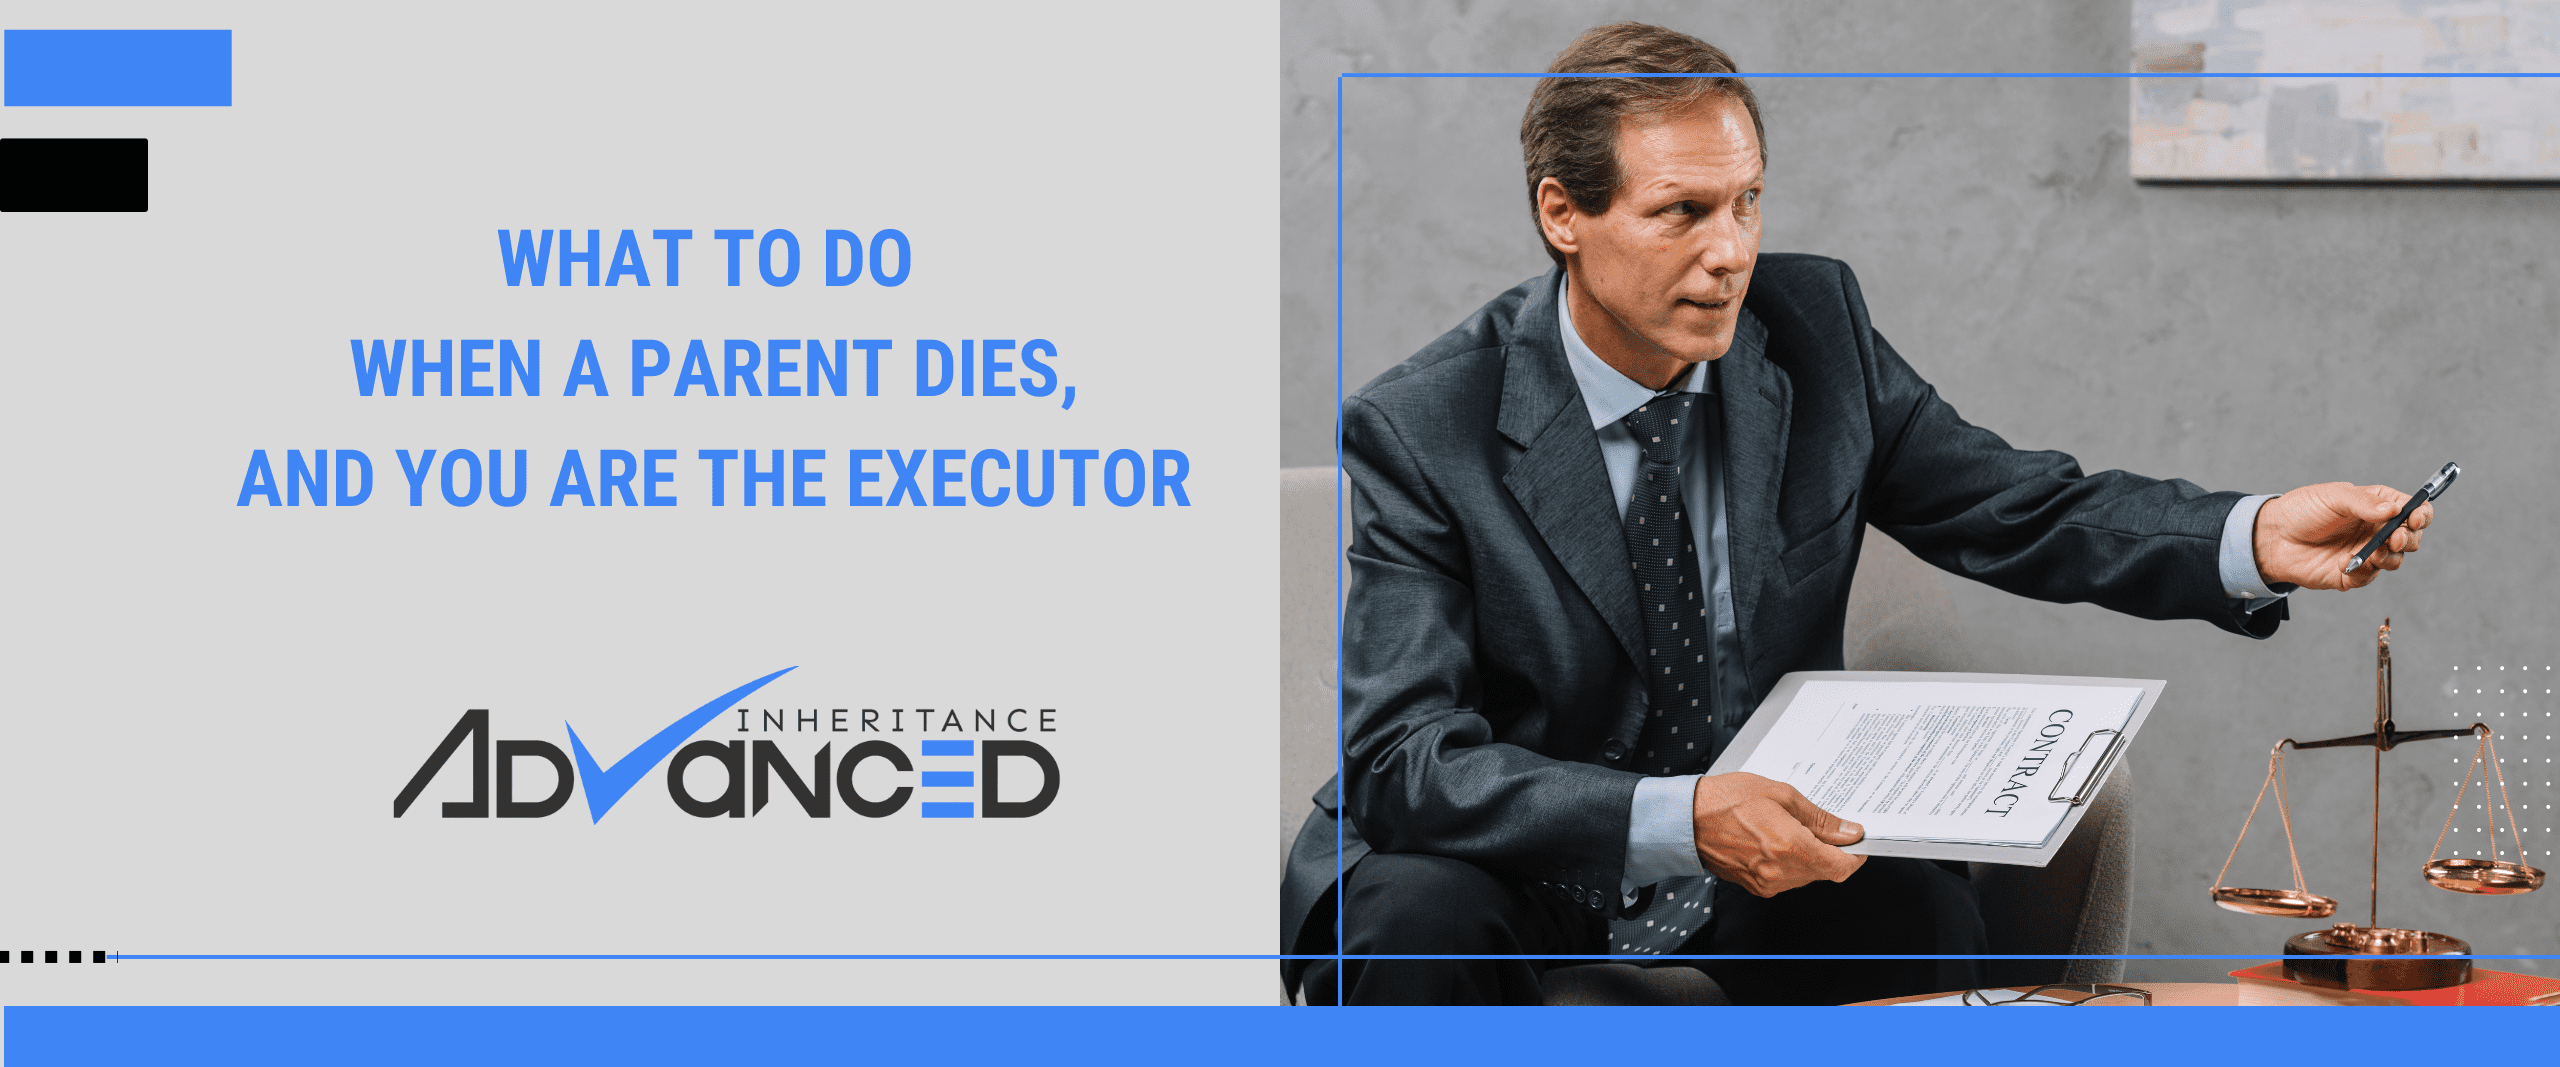 What To Do When A Parent Dies, And You Are The Executor